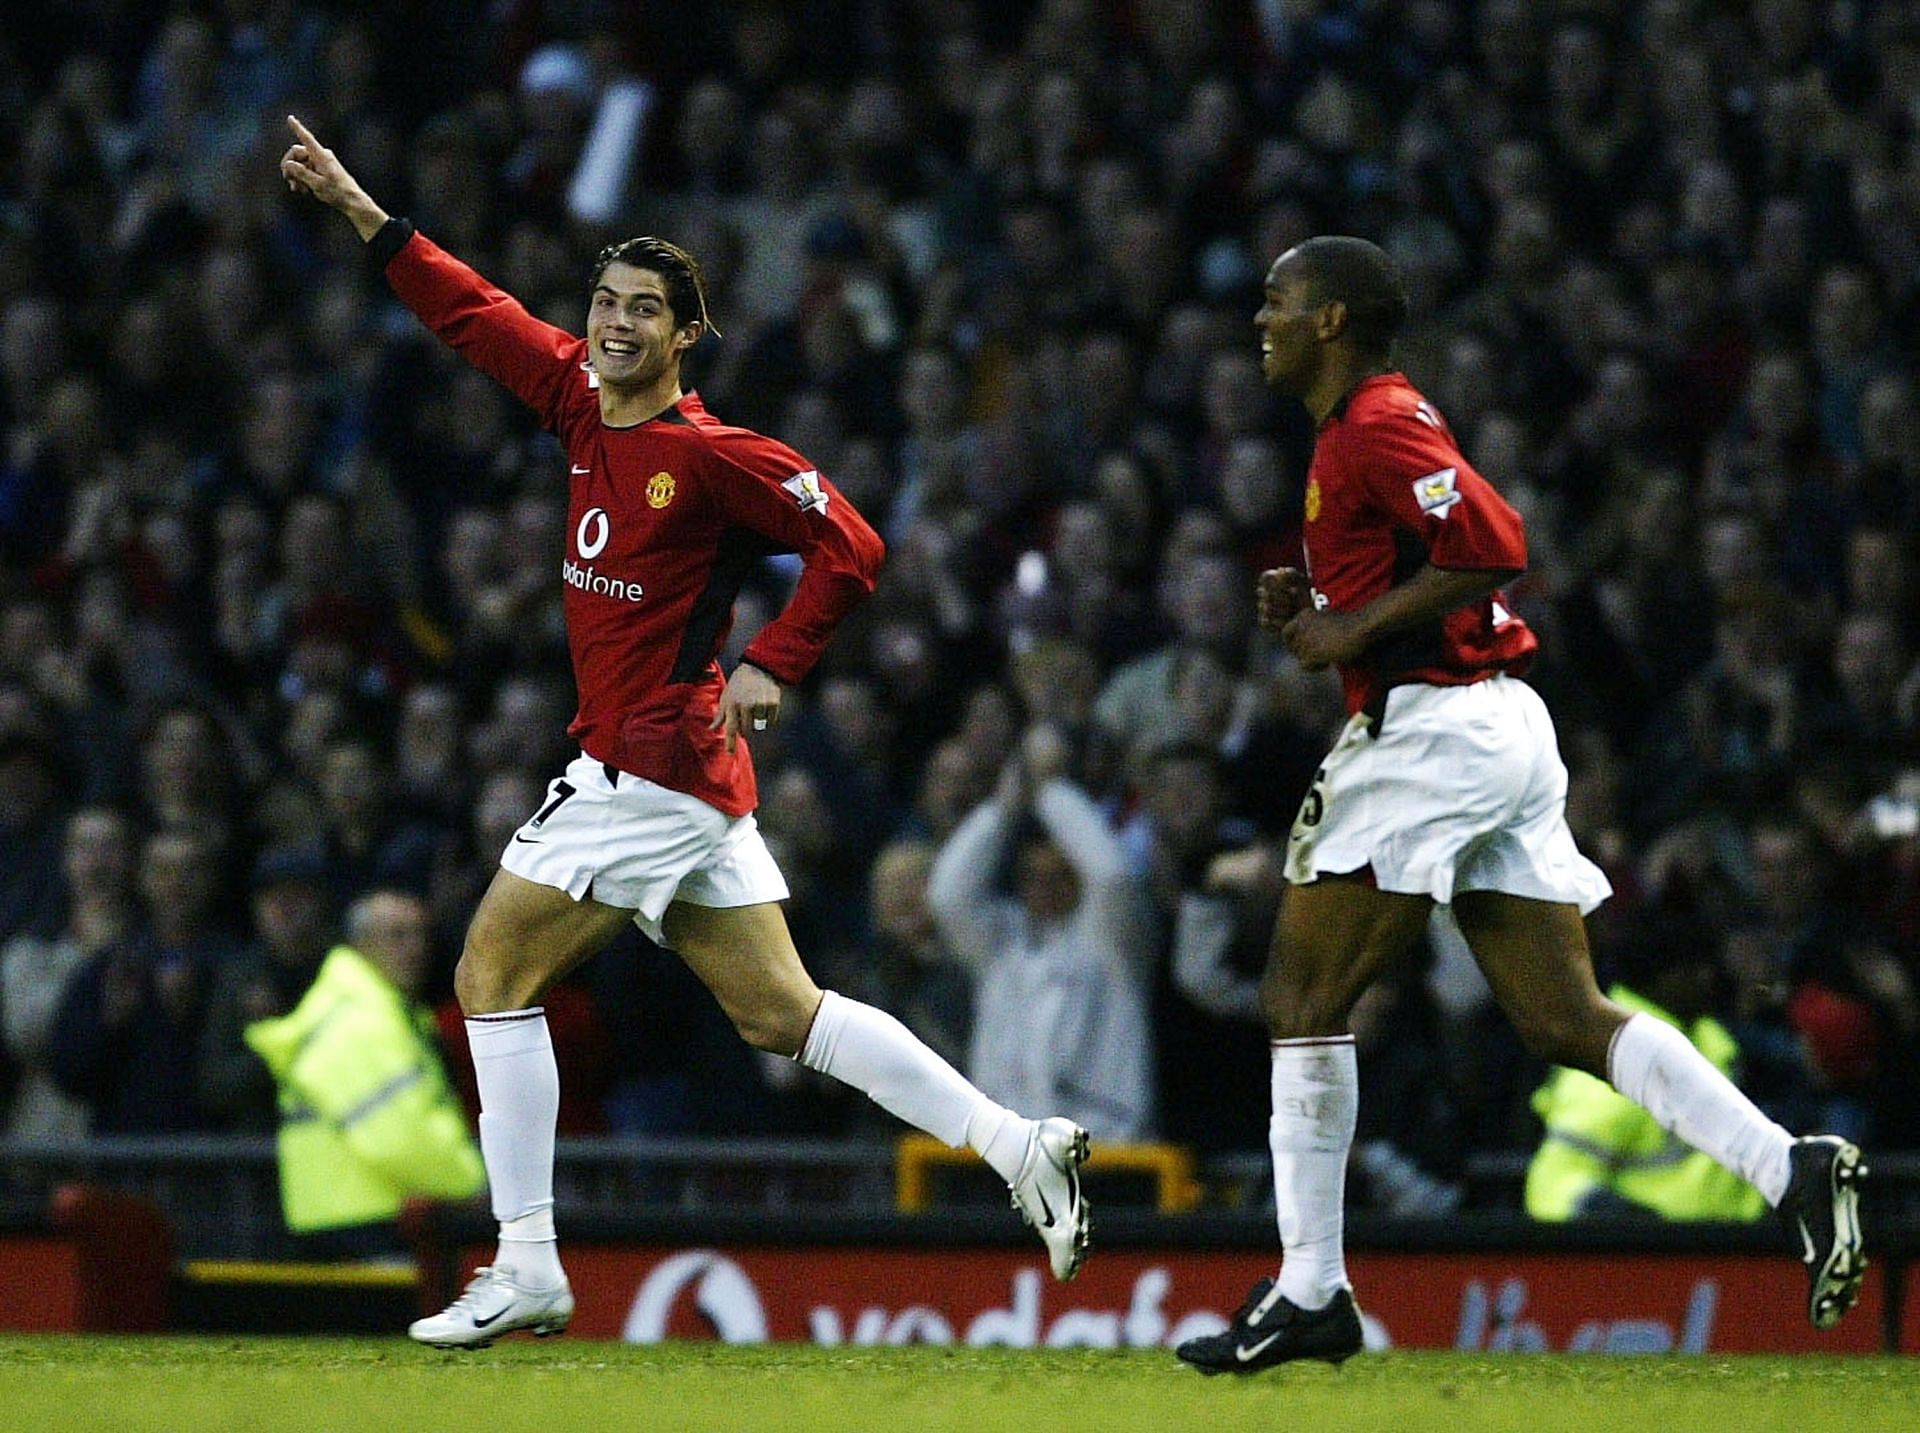 First Goal for Manchester United (2003)